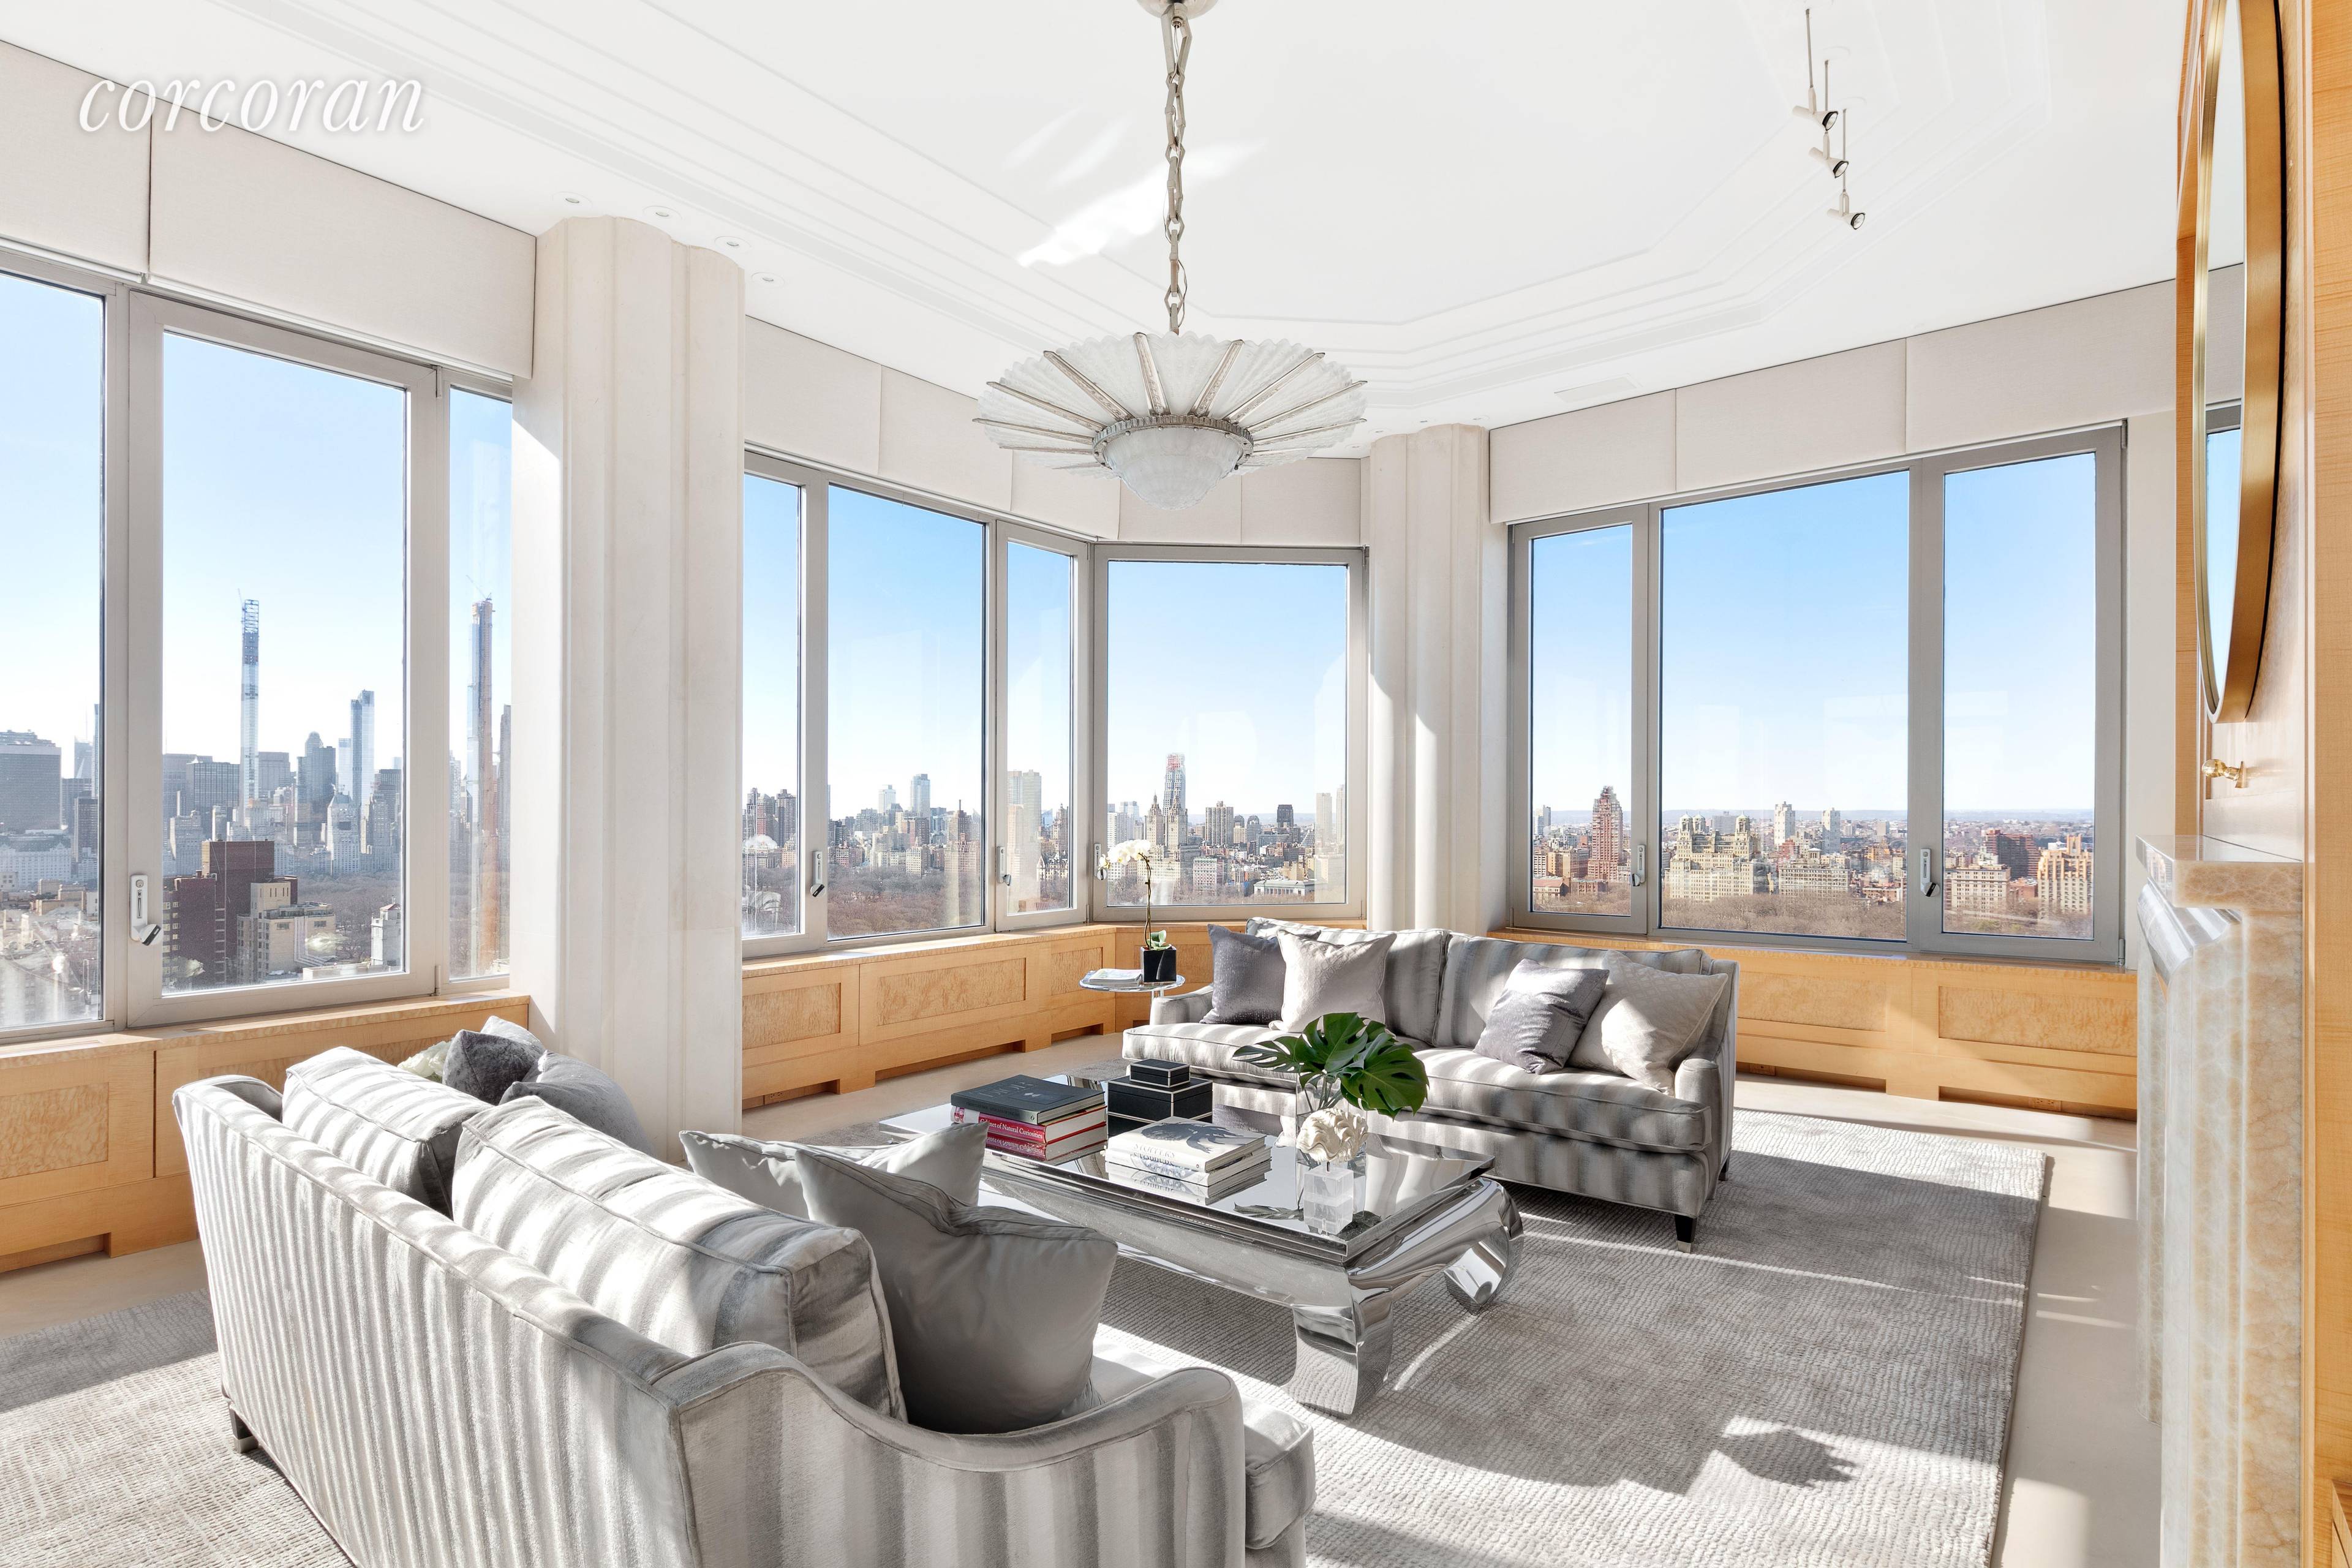 This triplex penthouse condominium residence with breathtaking views of Central Park, the reservoir, the East river, the West Side and southern city skyline views comprises 5, 180 sq.